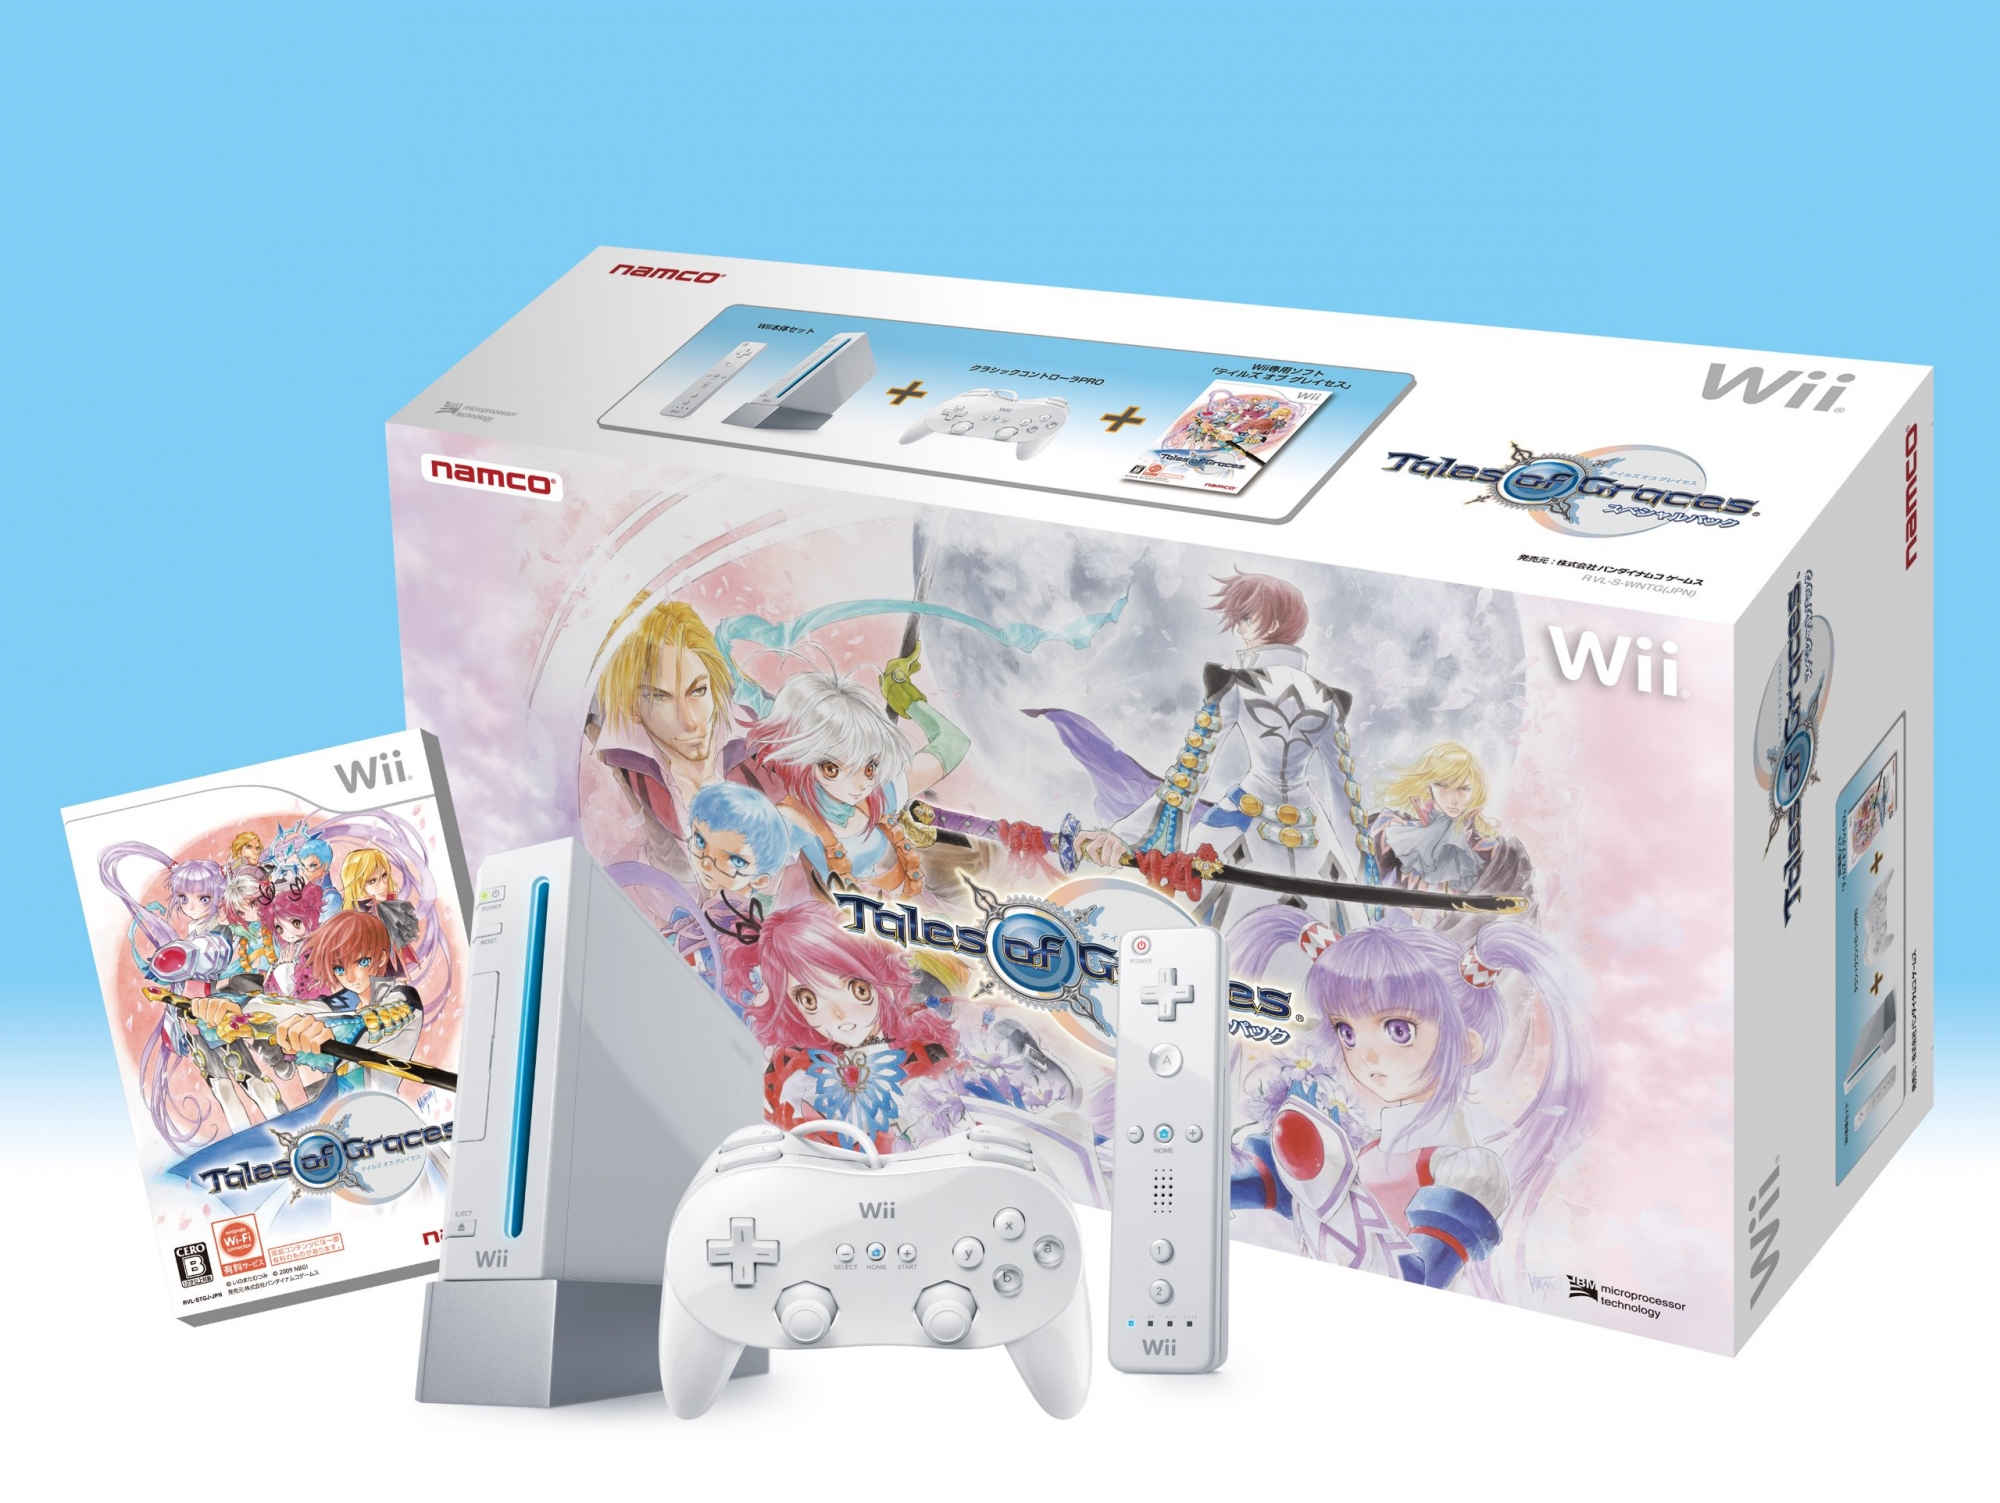 Tales of Graces Special Pack (Wii Bundle)
